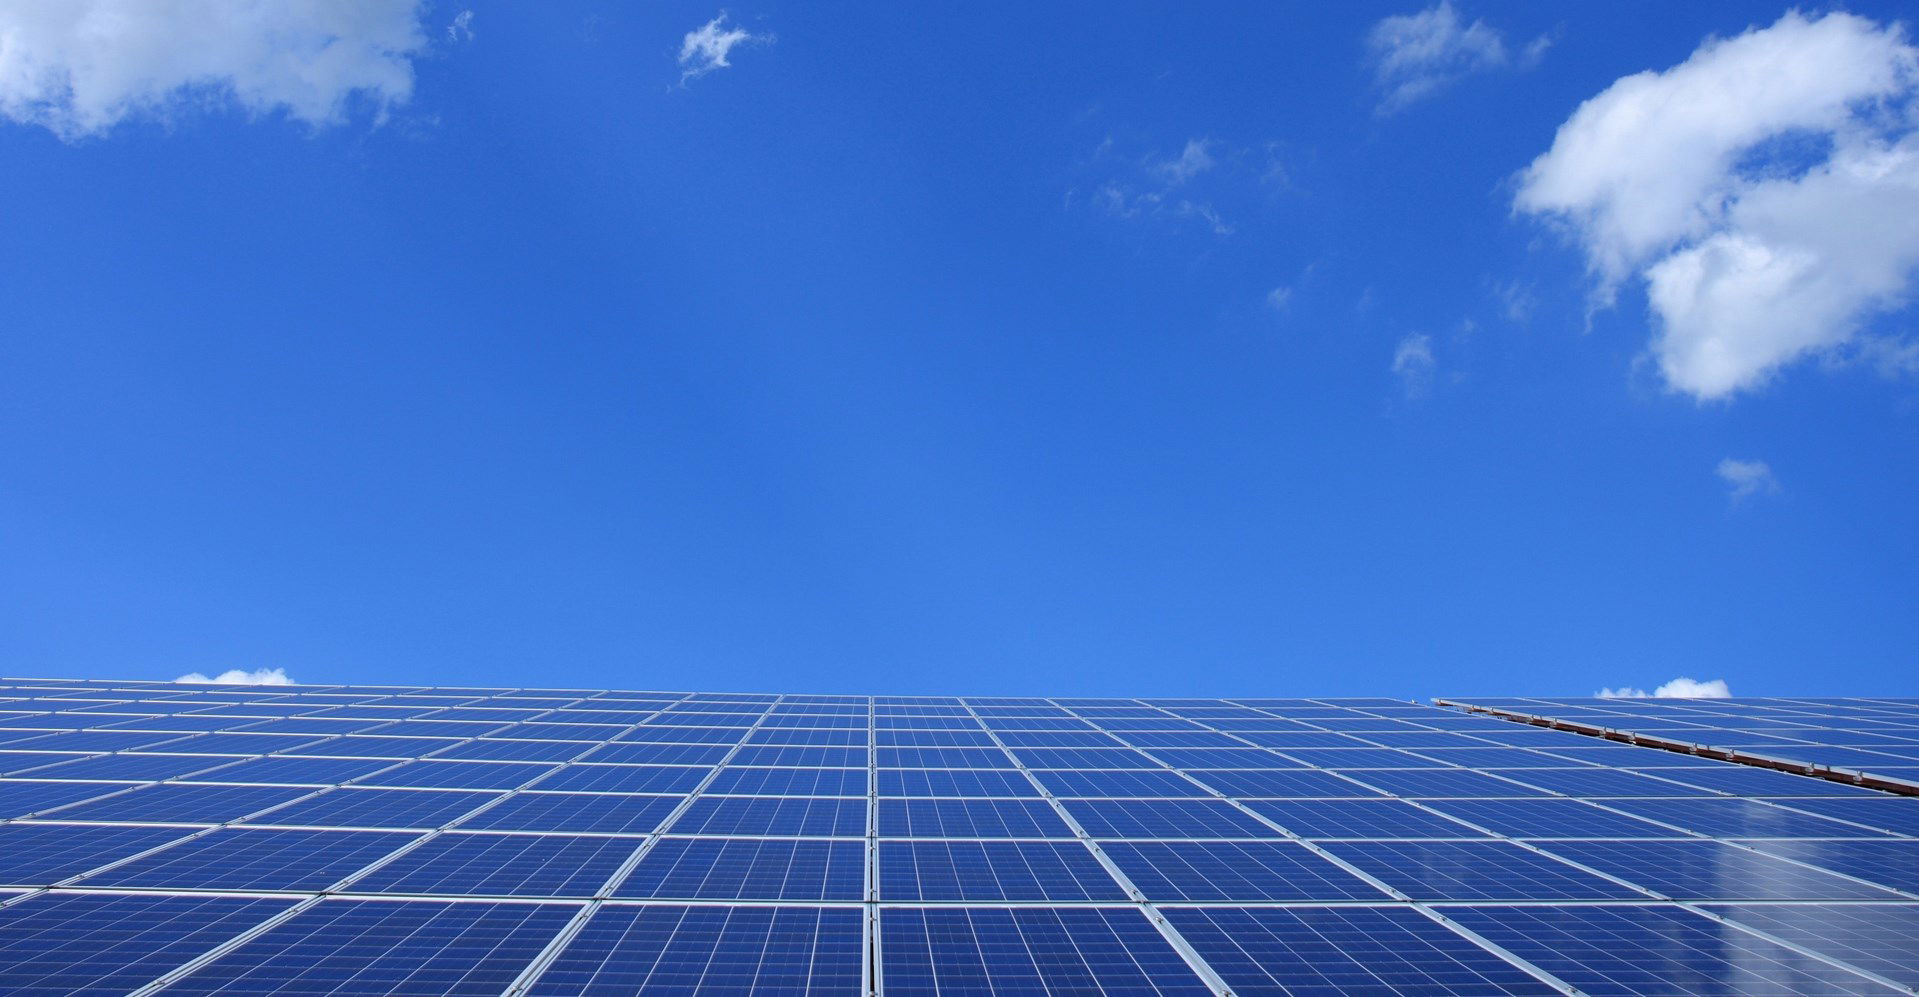 Discover how Keppel MET Renewables is growing its solar portfolio with new acquisitions in Italy.